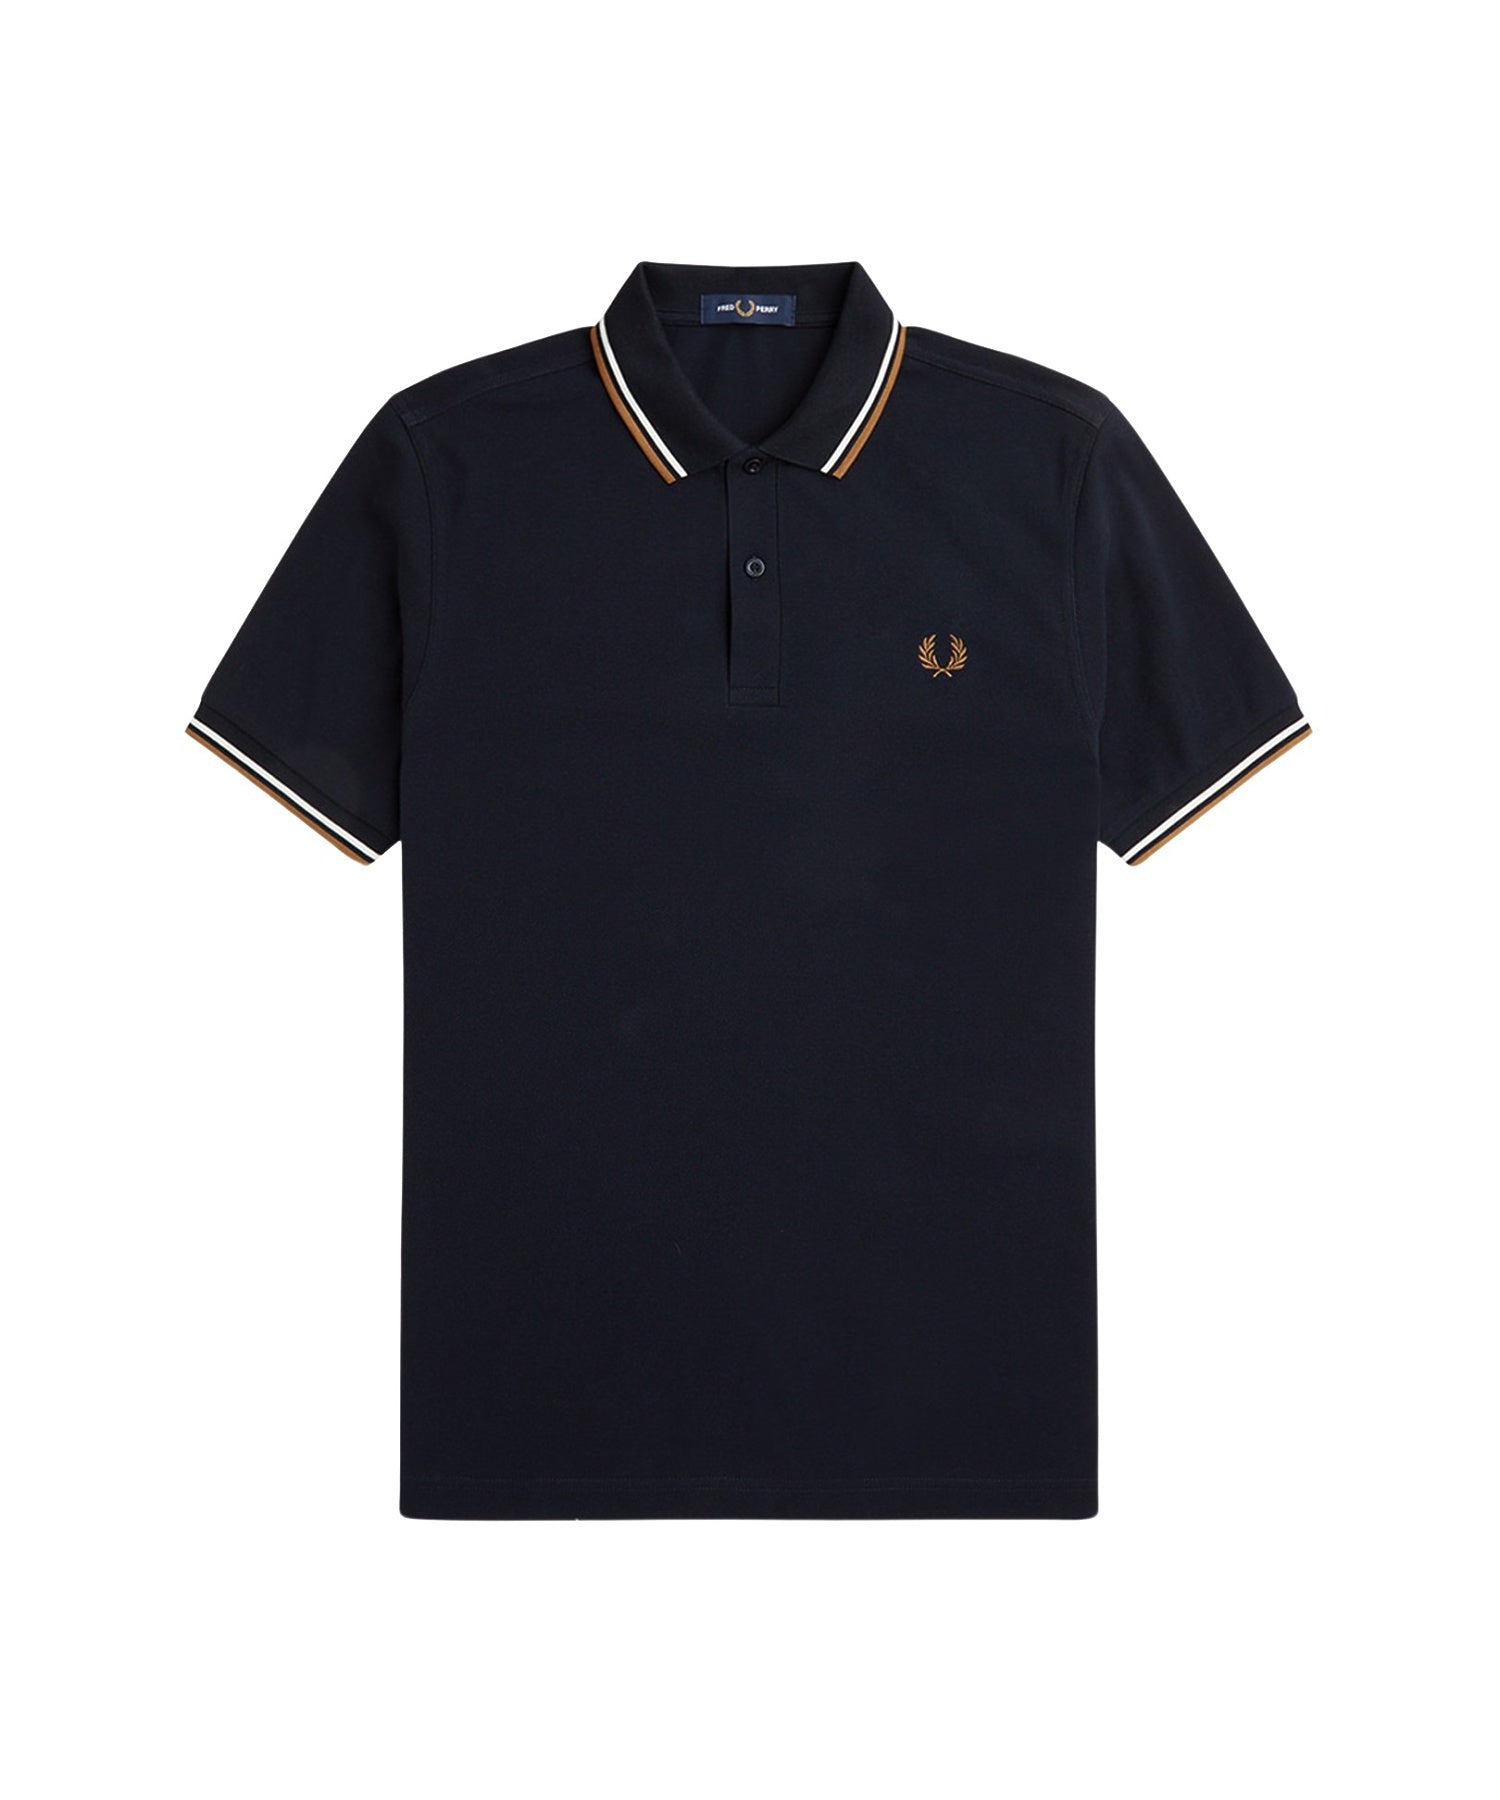 FRED PERRY/フレッドペリー/TWIN TIPPED FRED PERRY SHIRT/M3600/U86